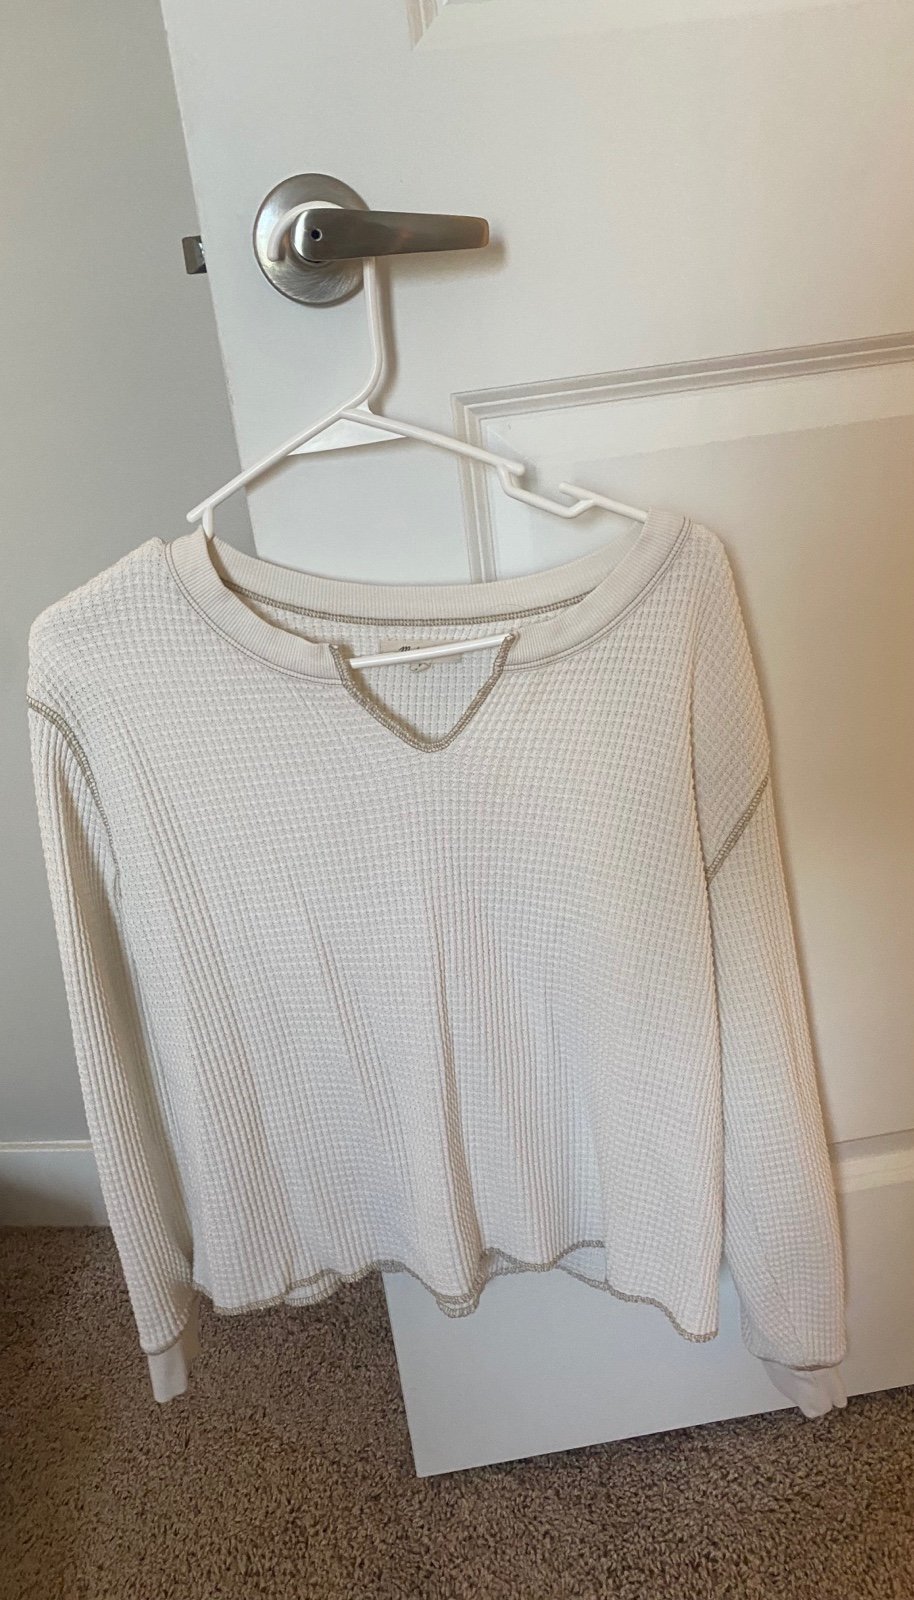 the Lowest price Madewell top fVU3pf7XR Hot Sale